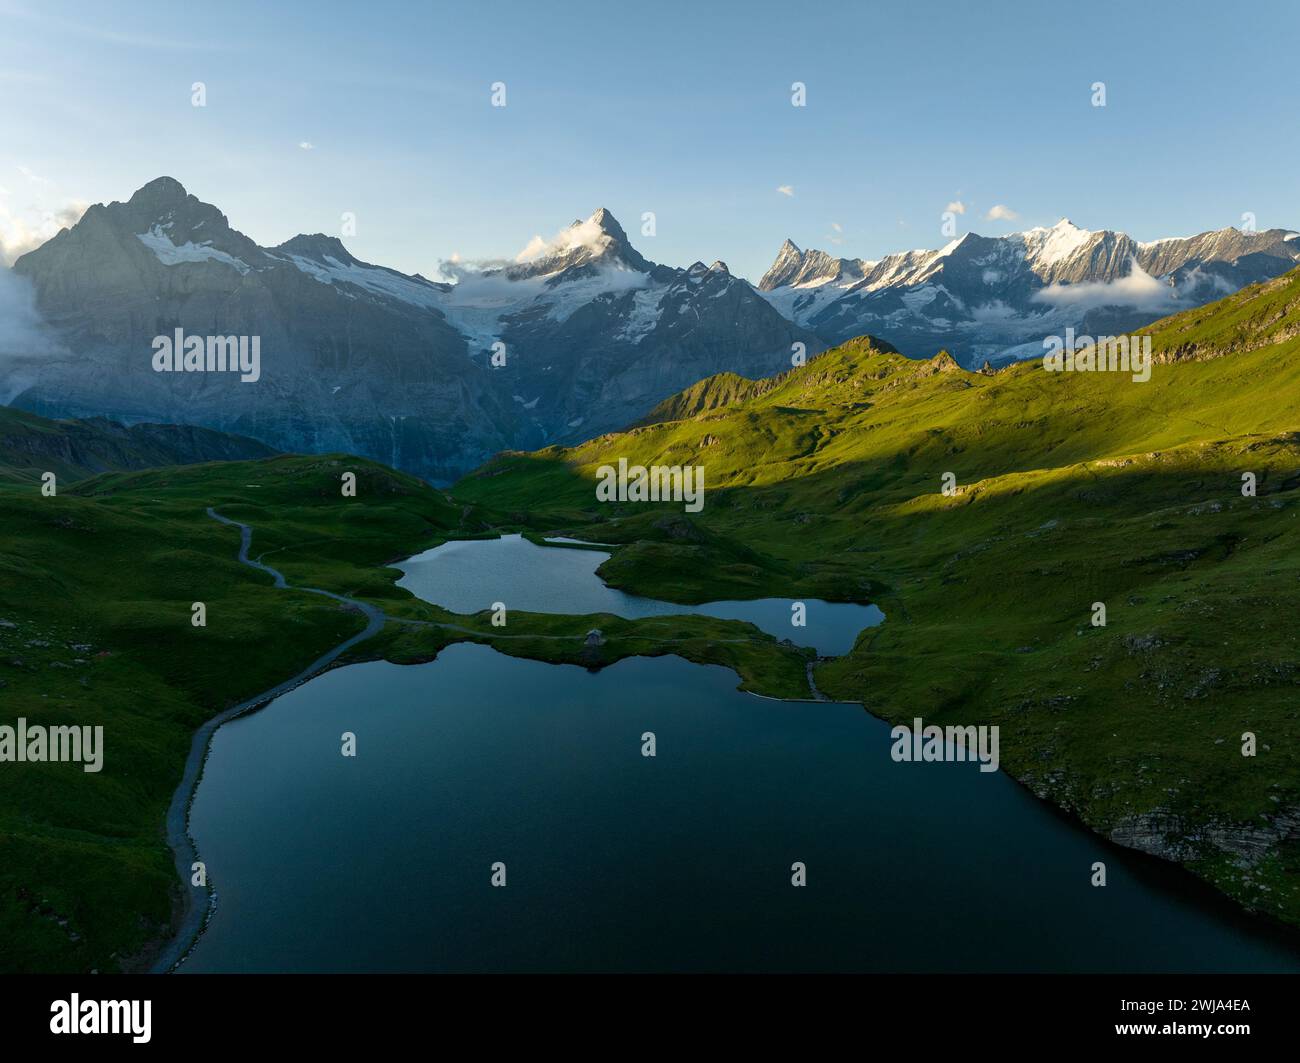 A tranquil evening view of Bachalpsee Lake surrounded by the lush greenery with the Swiss Alps in the background, bathed in the warm light of the sett Stock Photo